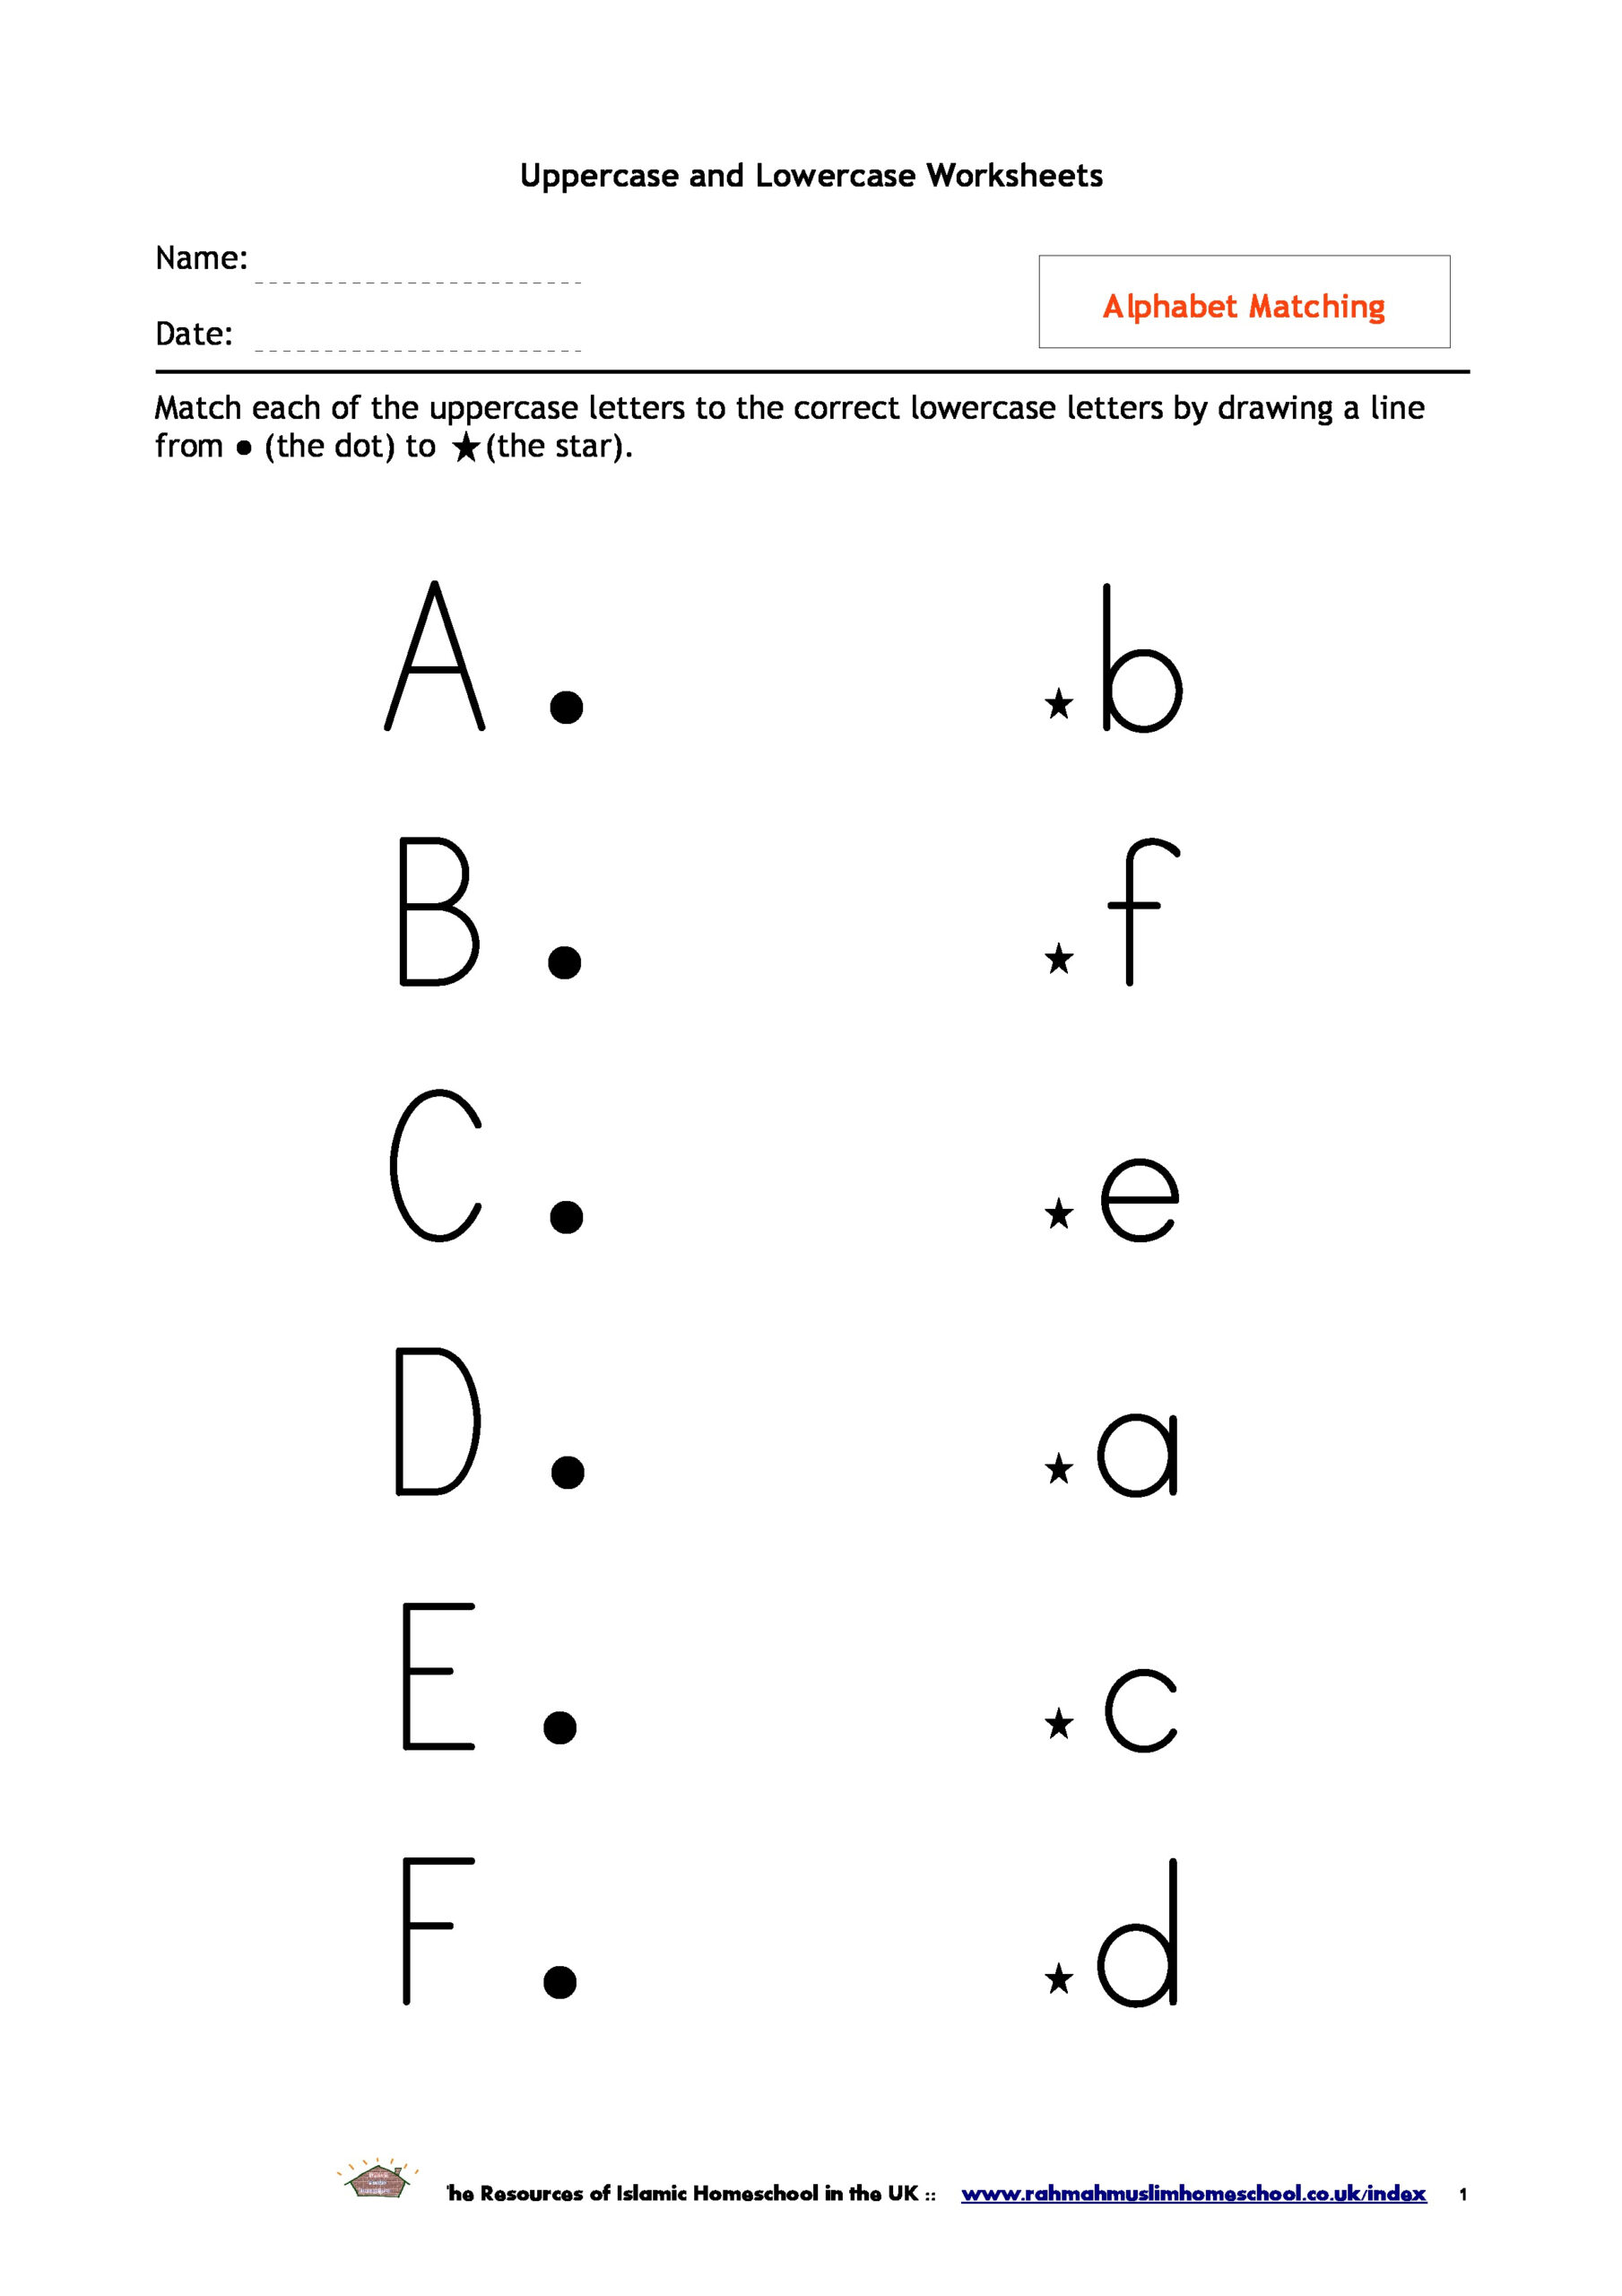 Alphabet Matching Worksheets | The Resources Of Islamic pertaining to Alphabet Knowledge Worksheets